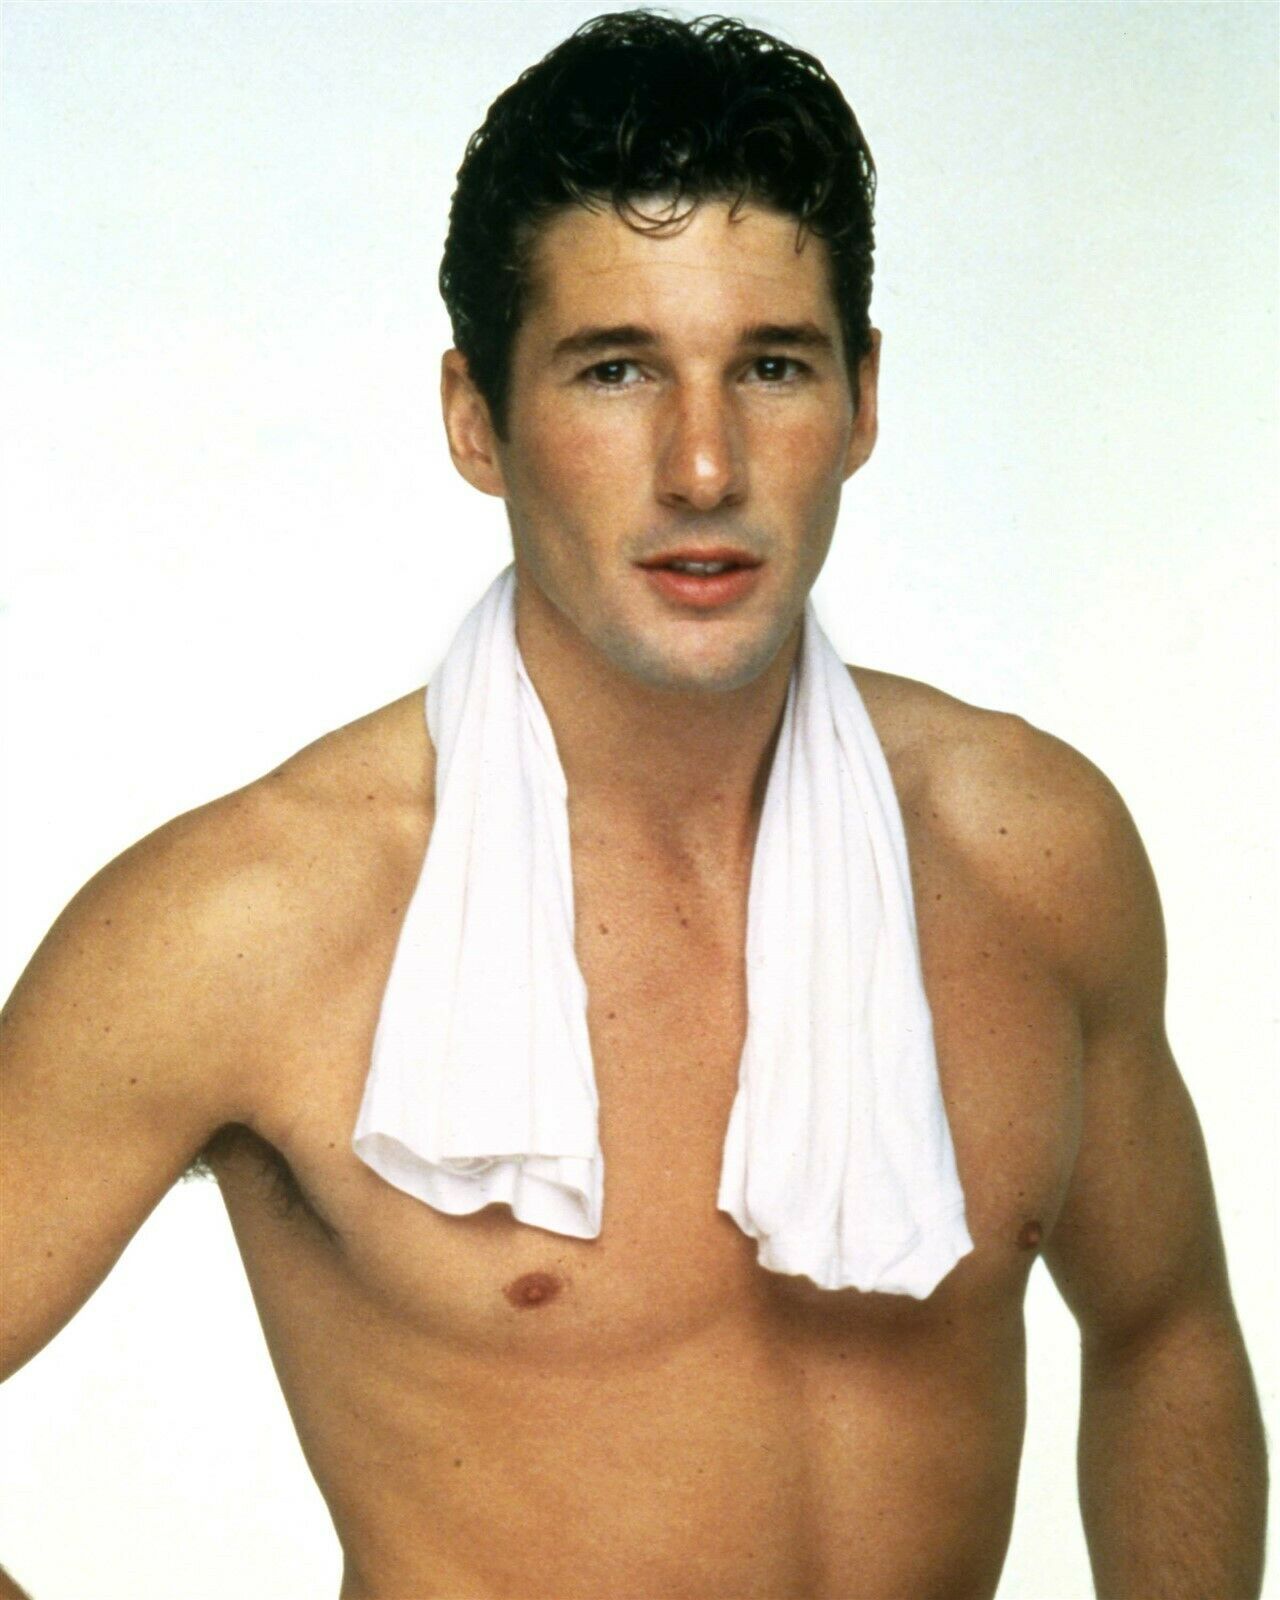 Richard Gere young beefcake bare chested portrait towel around neck 8x10 photo